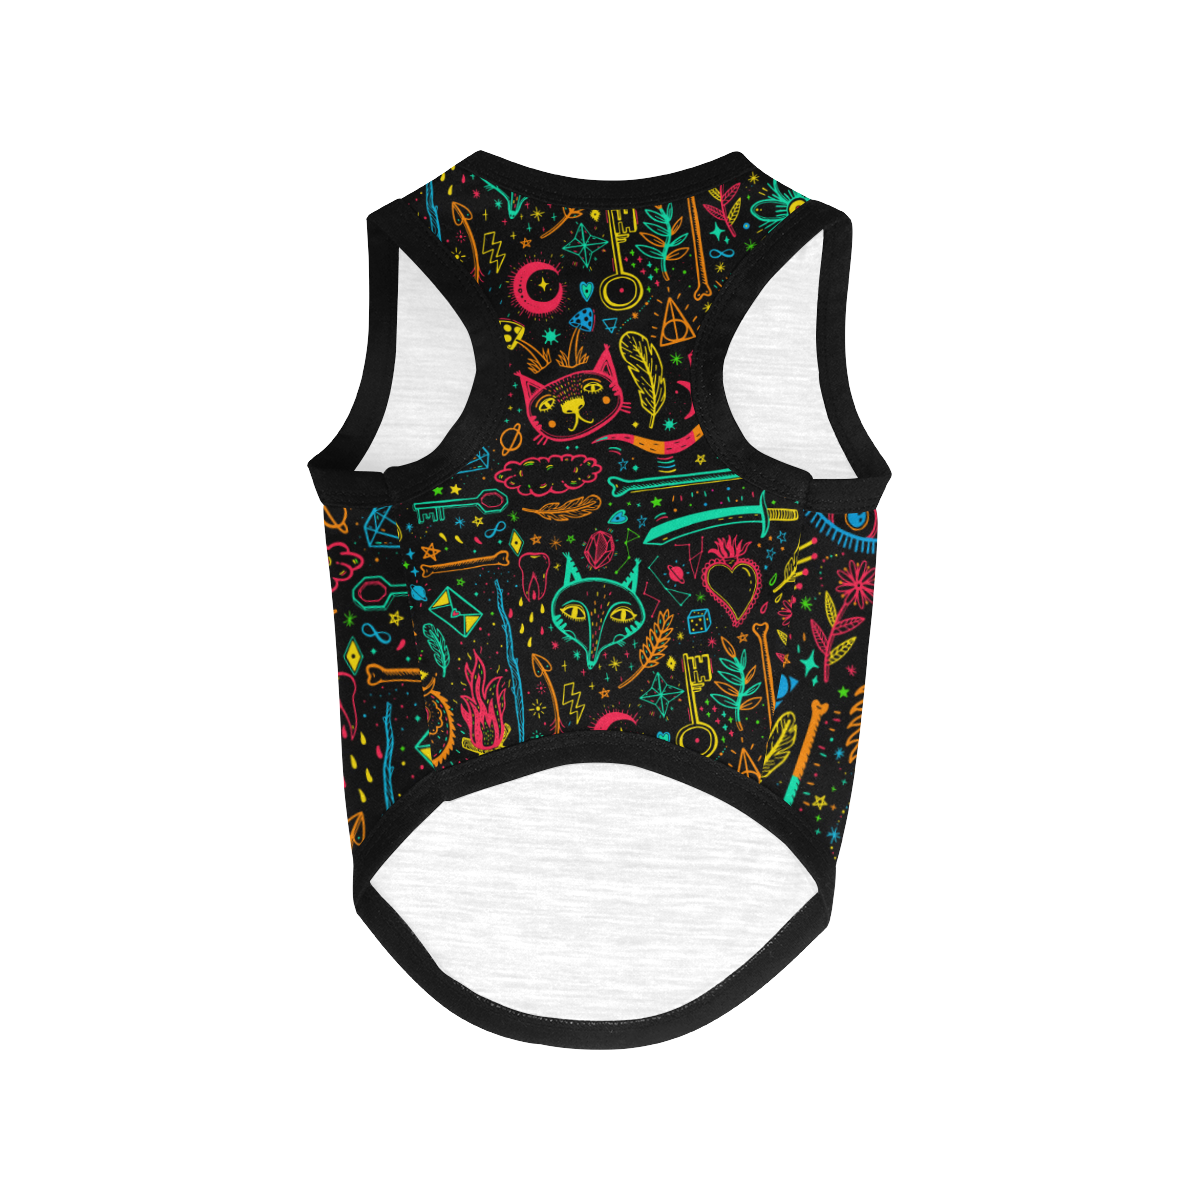 Funny Nature Of Life Sketchnotes Pattern 1 All Over Print Pet Tank Top